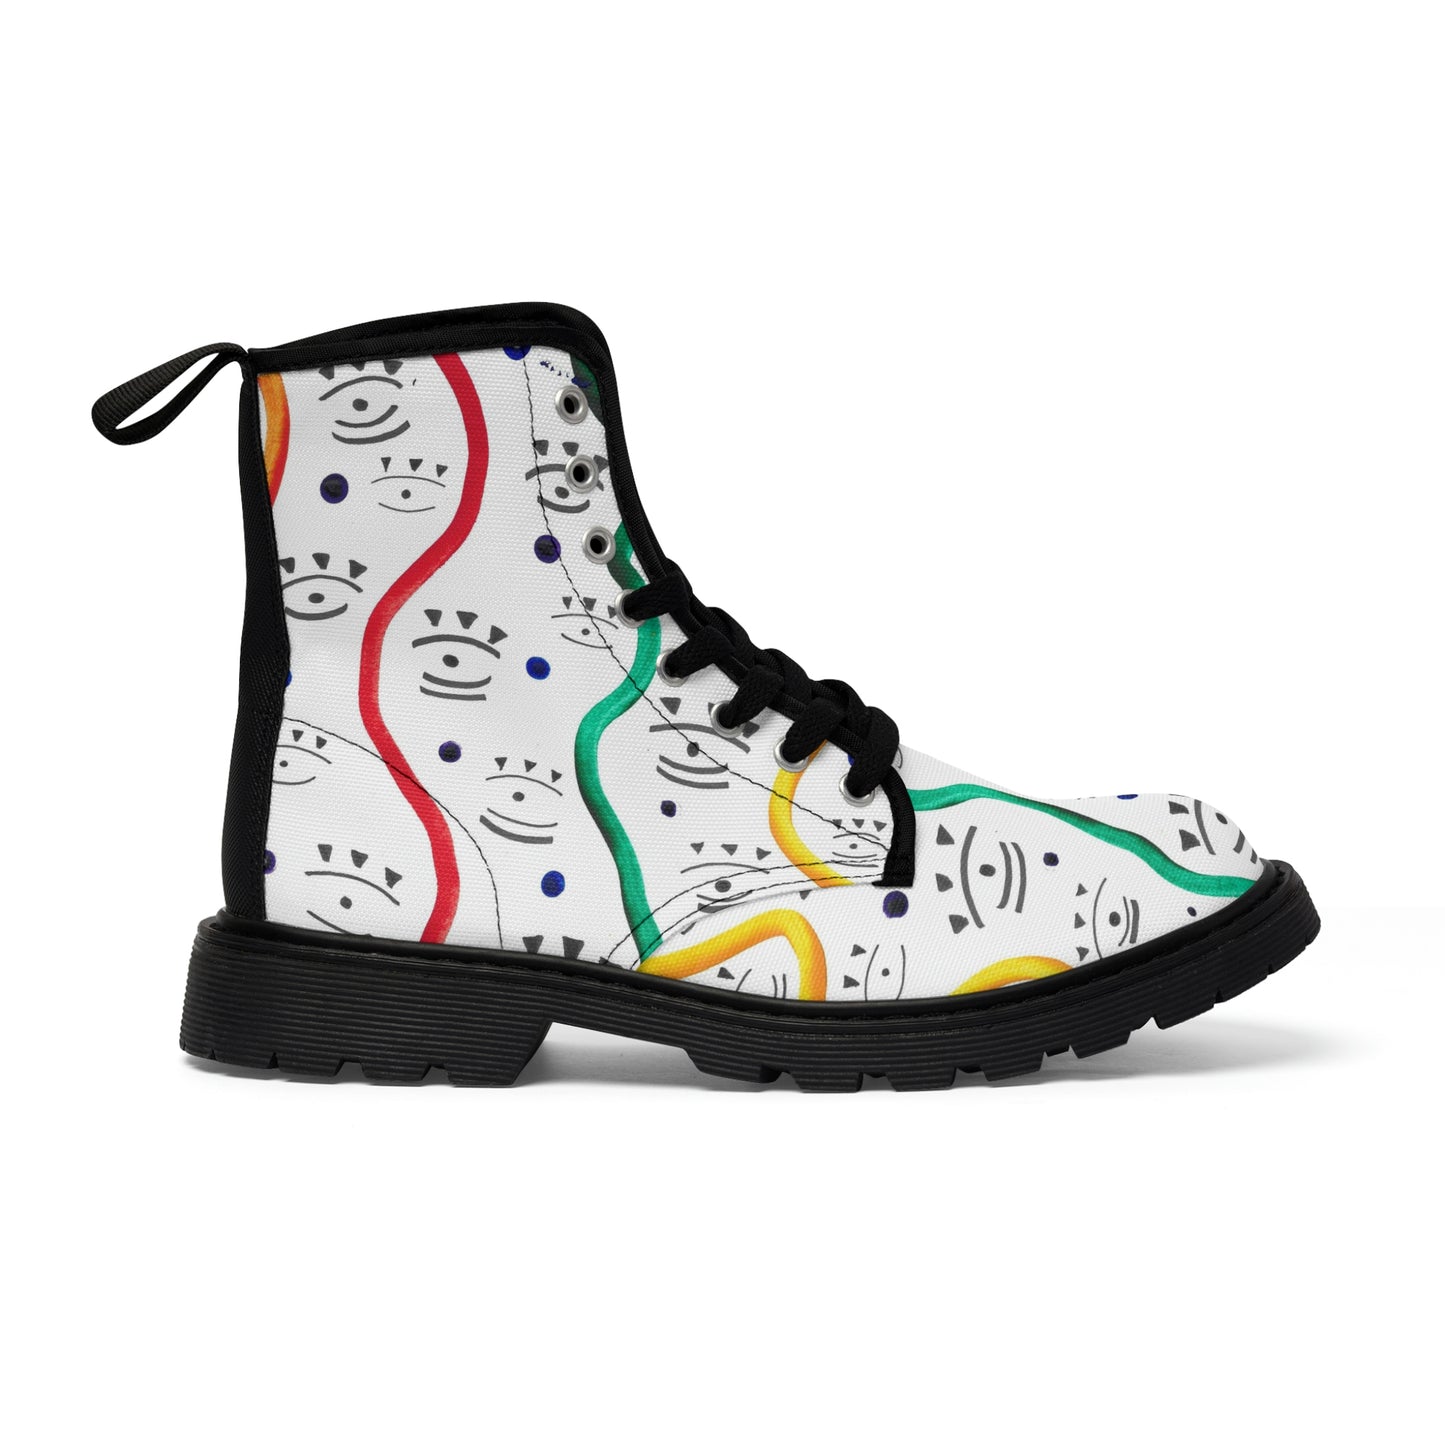 THE EYE - Men's Canvas Boots